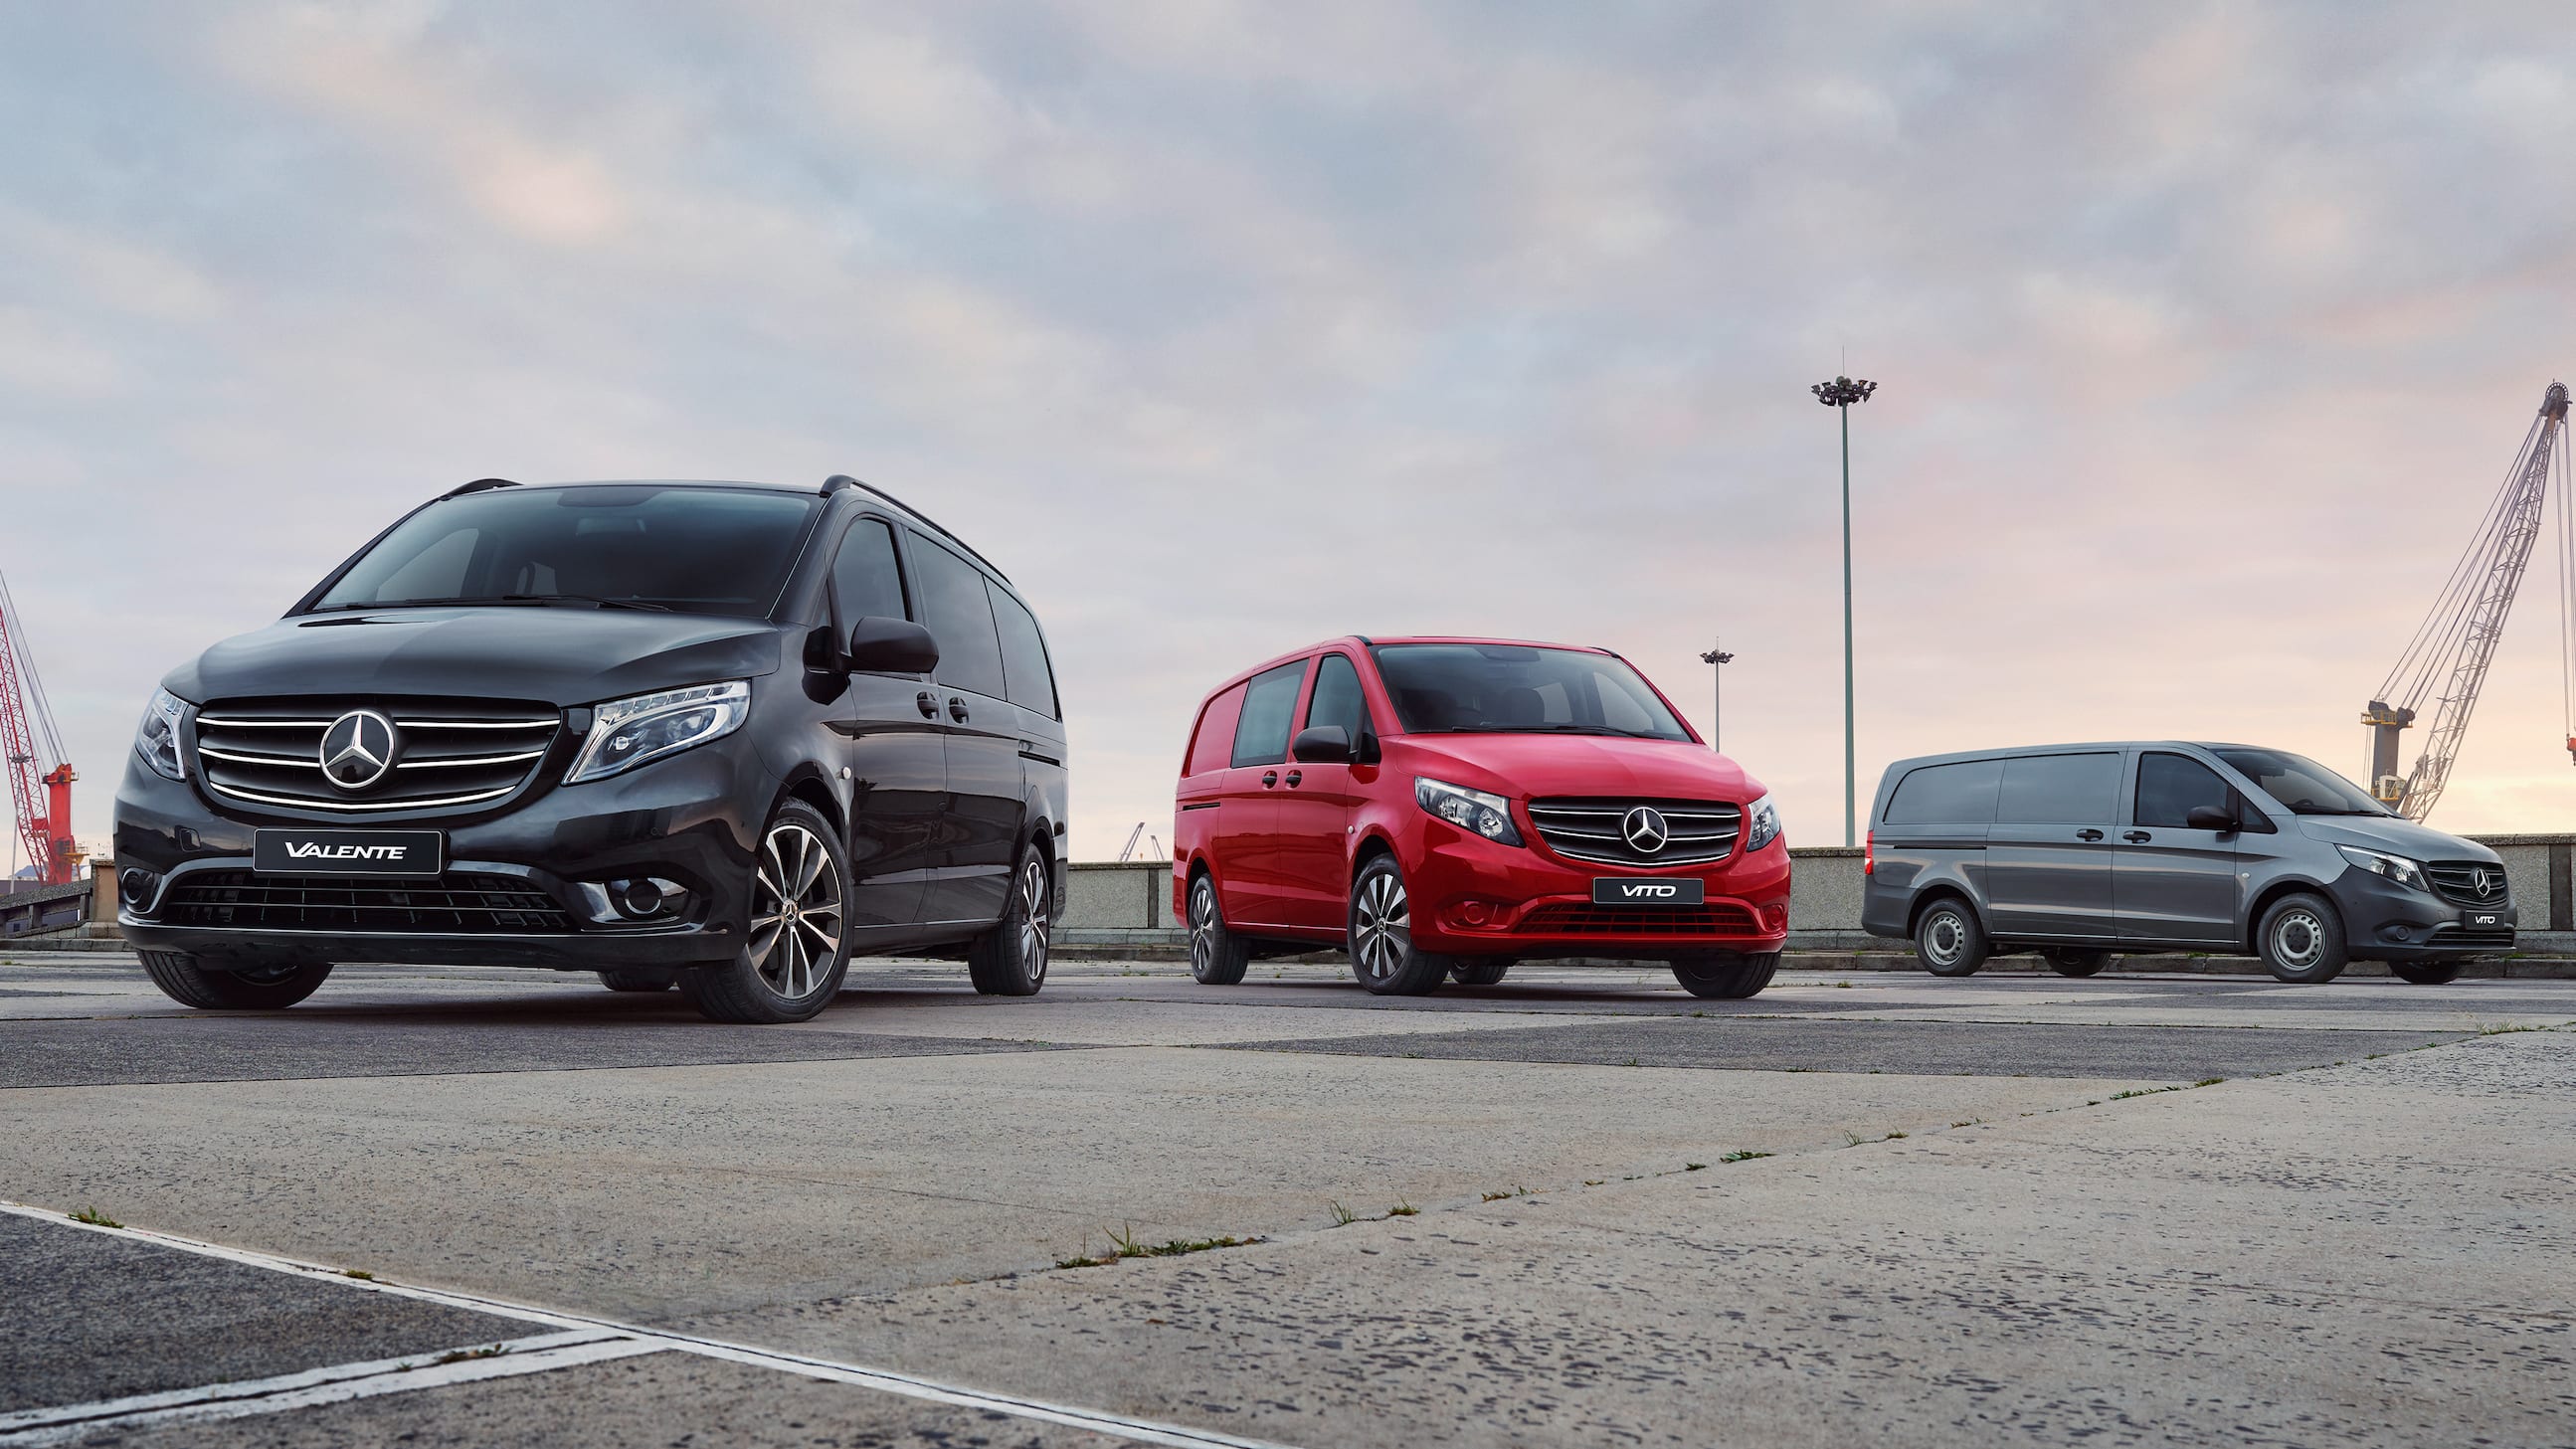 Distrahere pumpe Fruity 2021 Mercedes-Benz Vito and Valente price and specs: Prices up with safety  tech - Drive